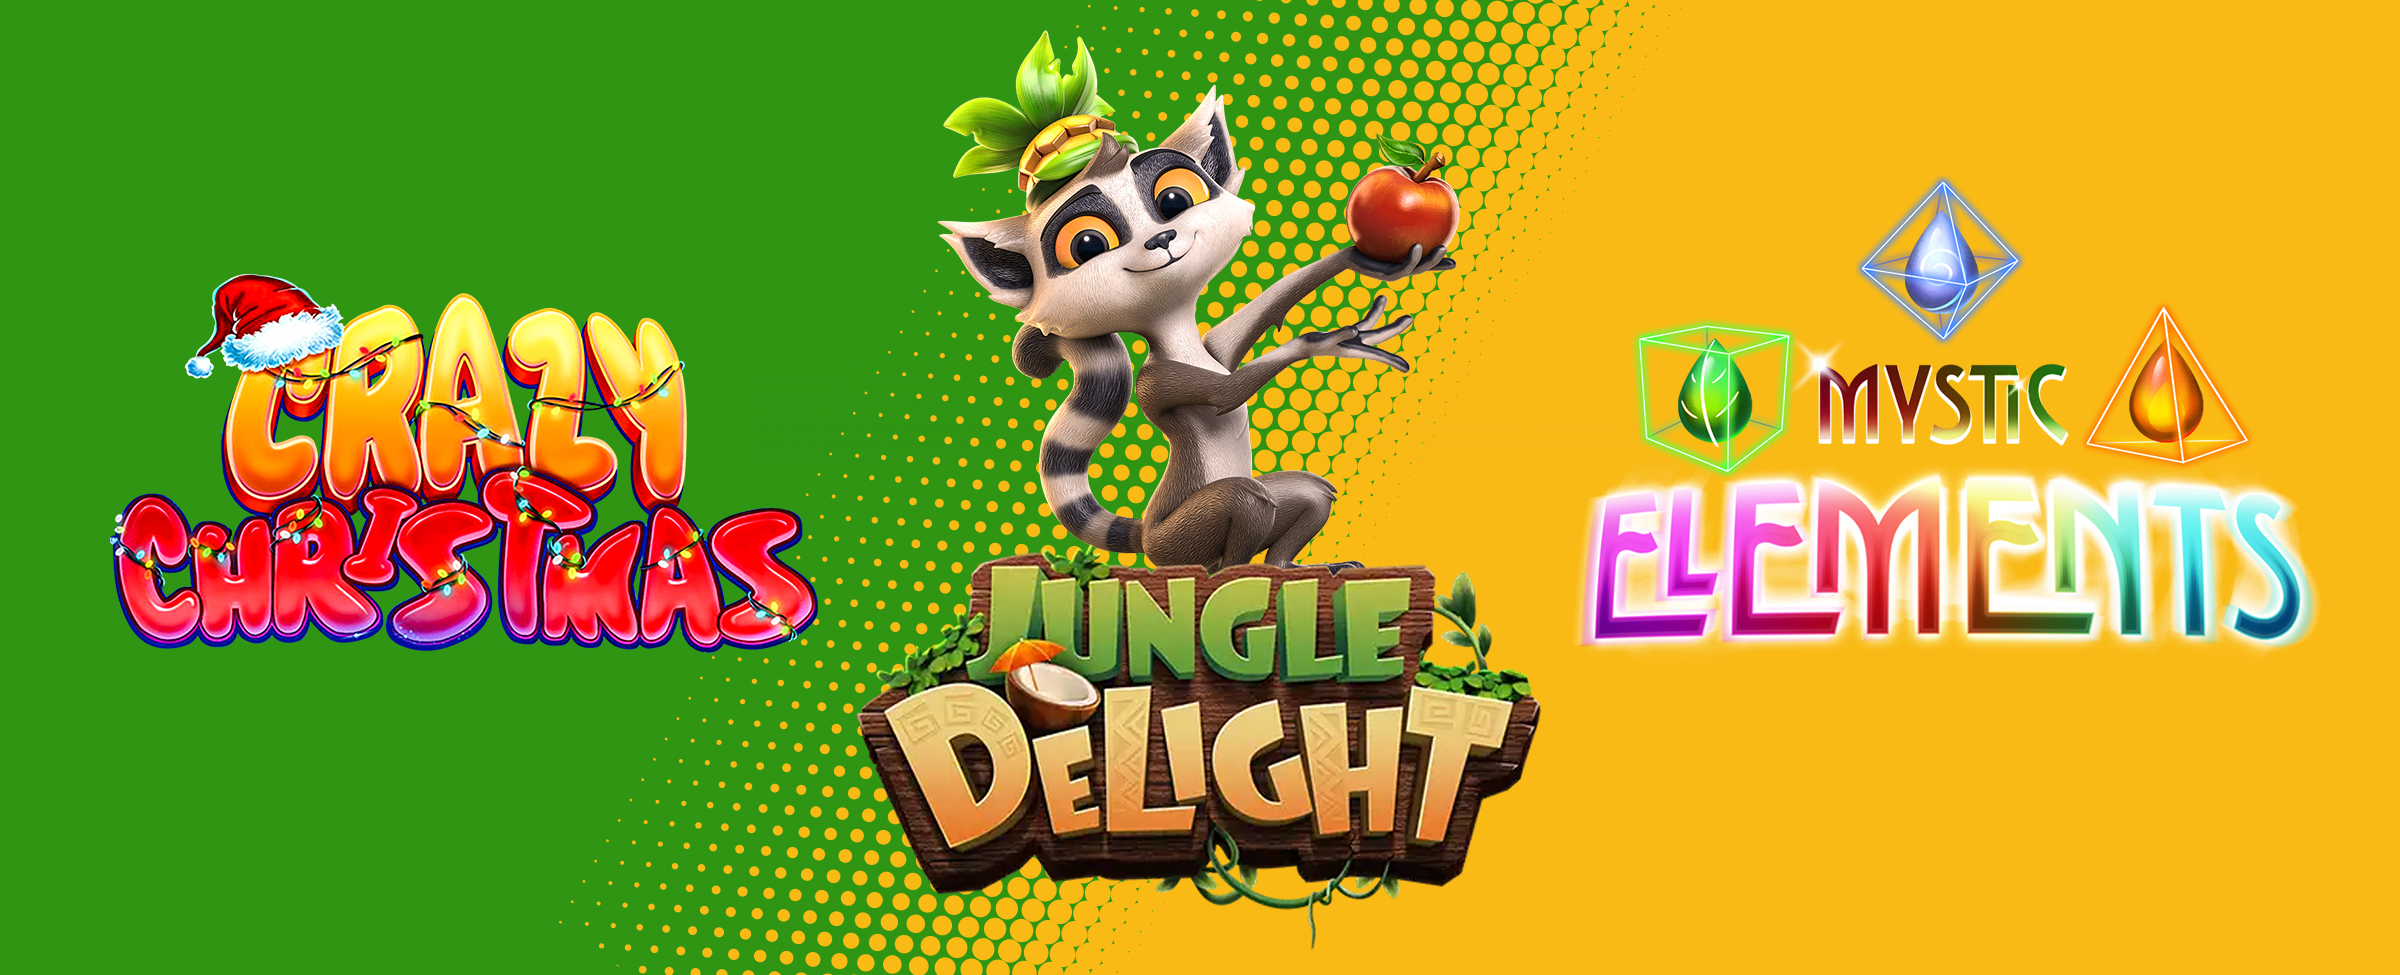 The next trio of treats for your playing pleasure are: Jungle Delight, Mystic Elements, and Crazy Christmas (relax – it’s always Christmas at Joe’s!).